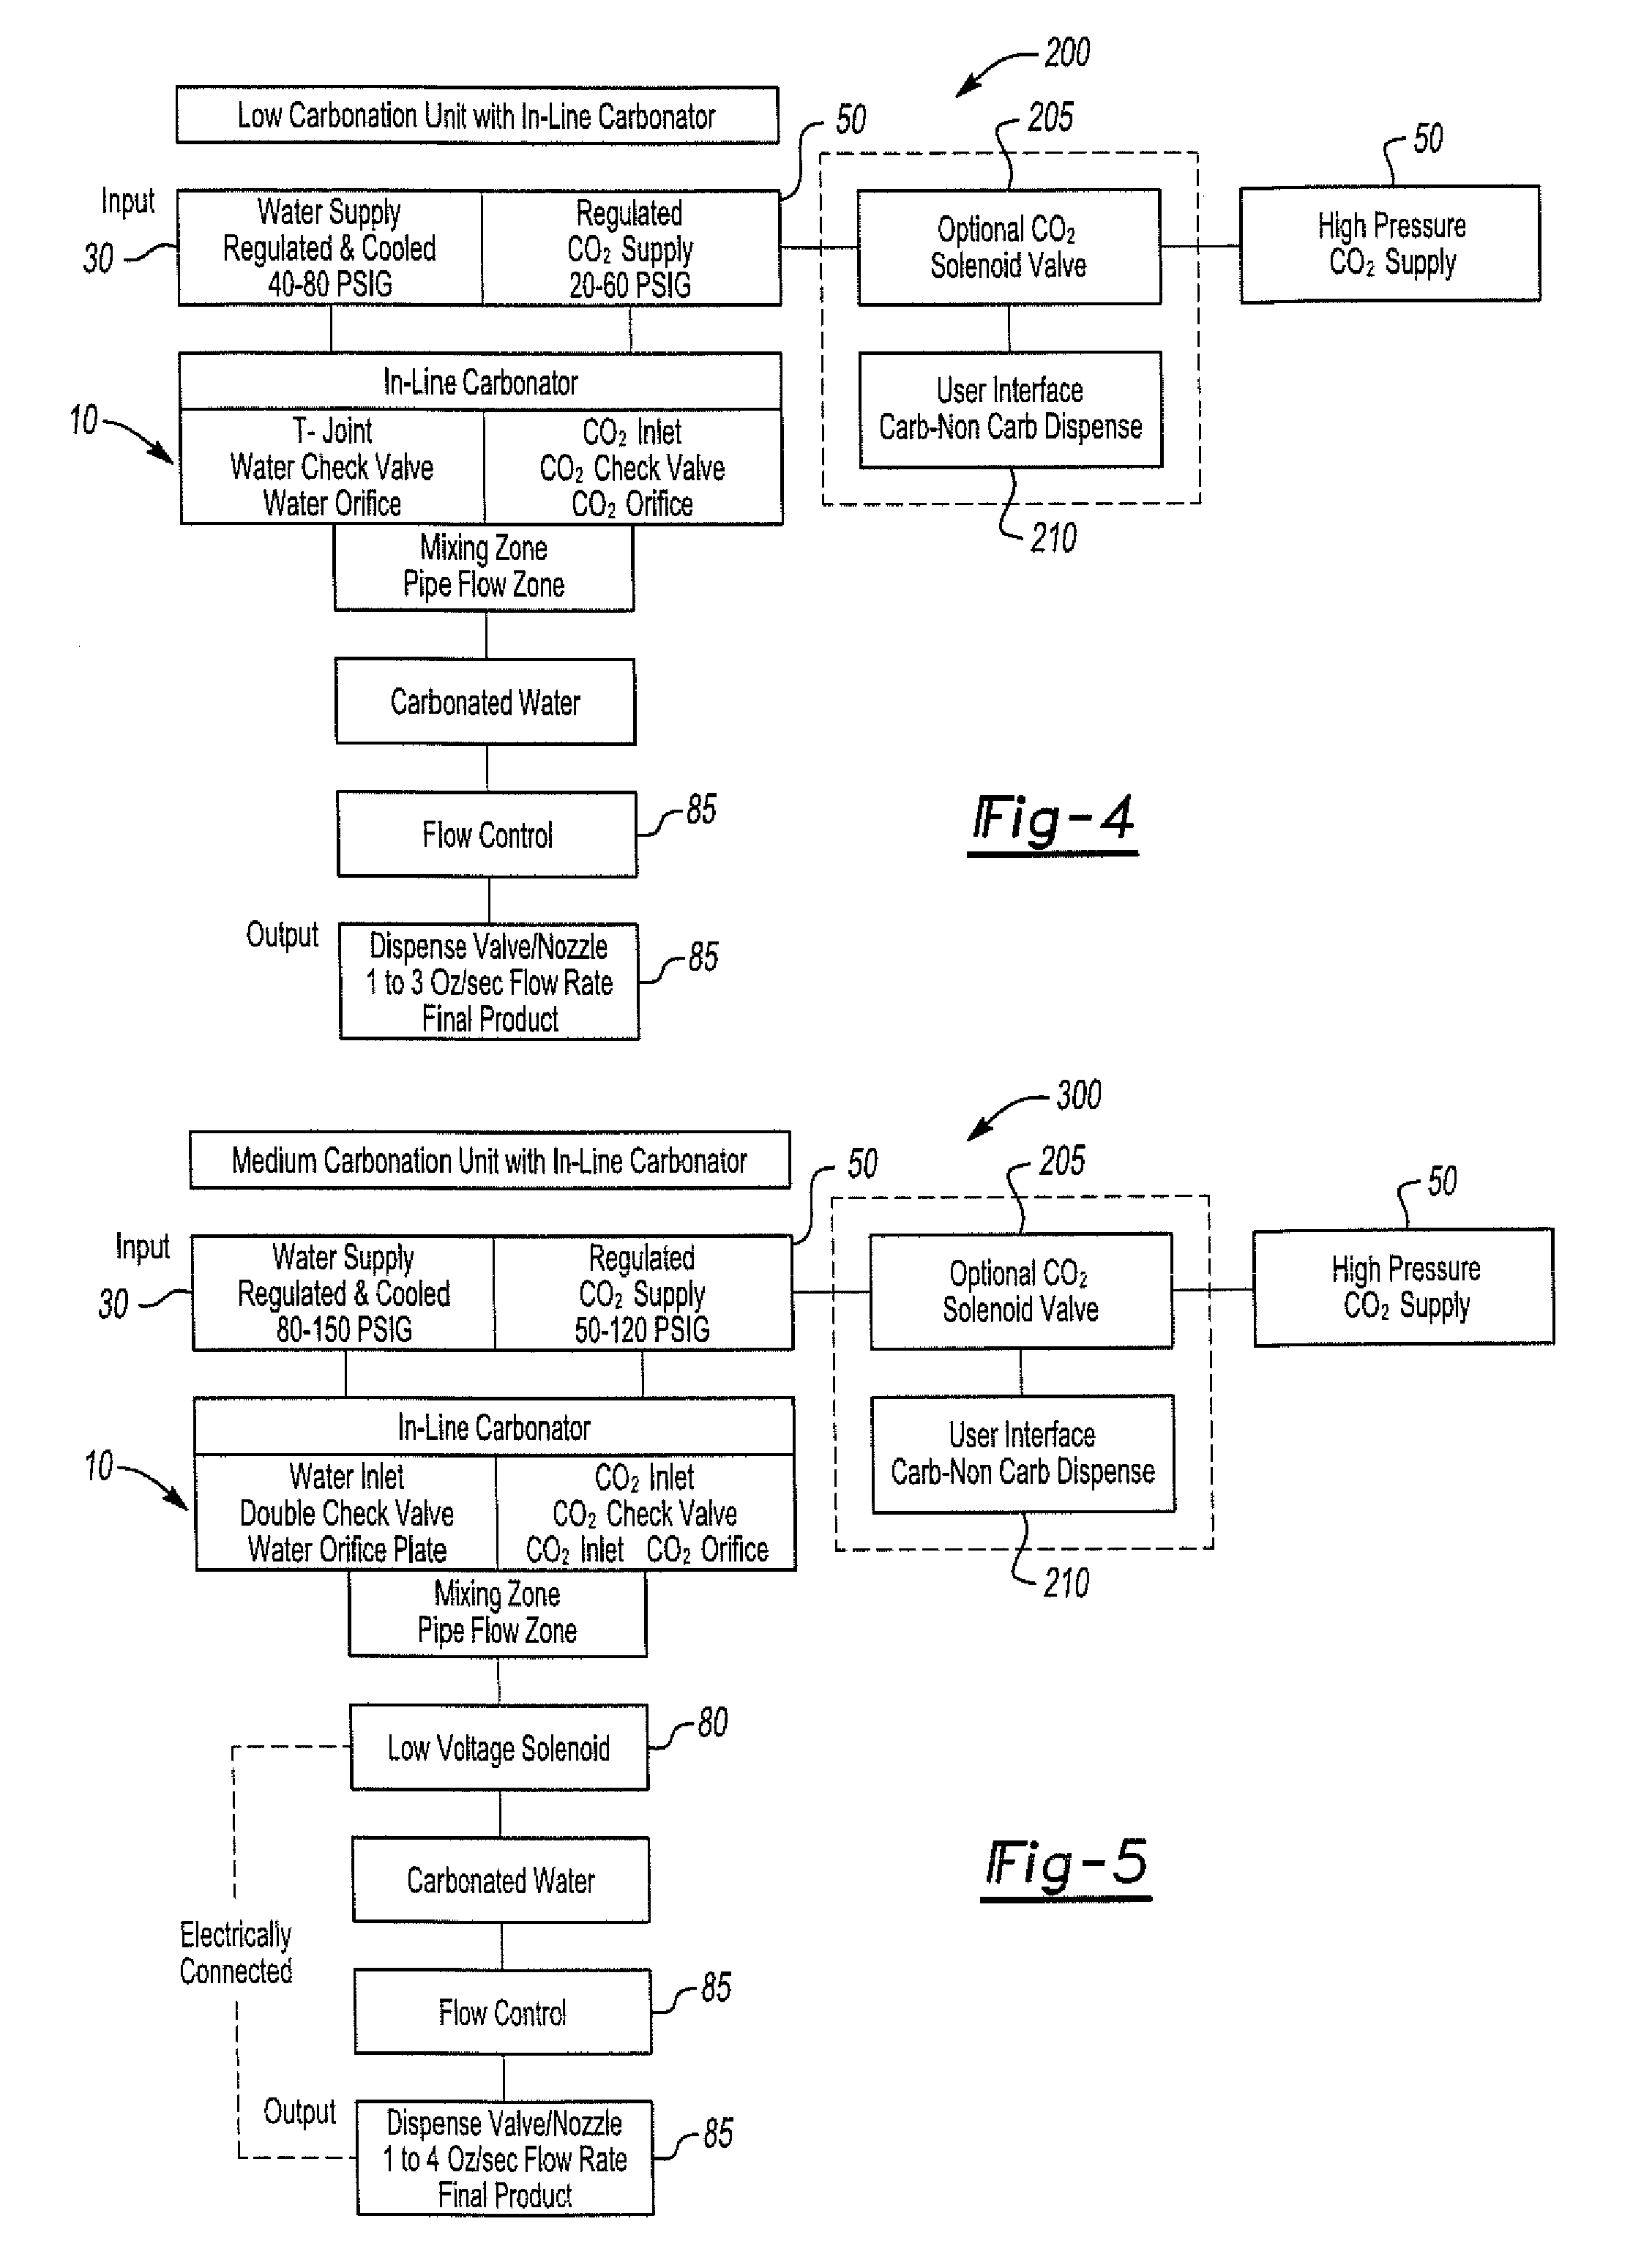 Variable carbonation using in-line carbonator